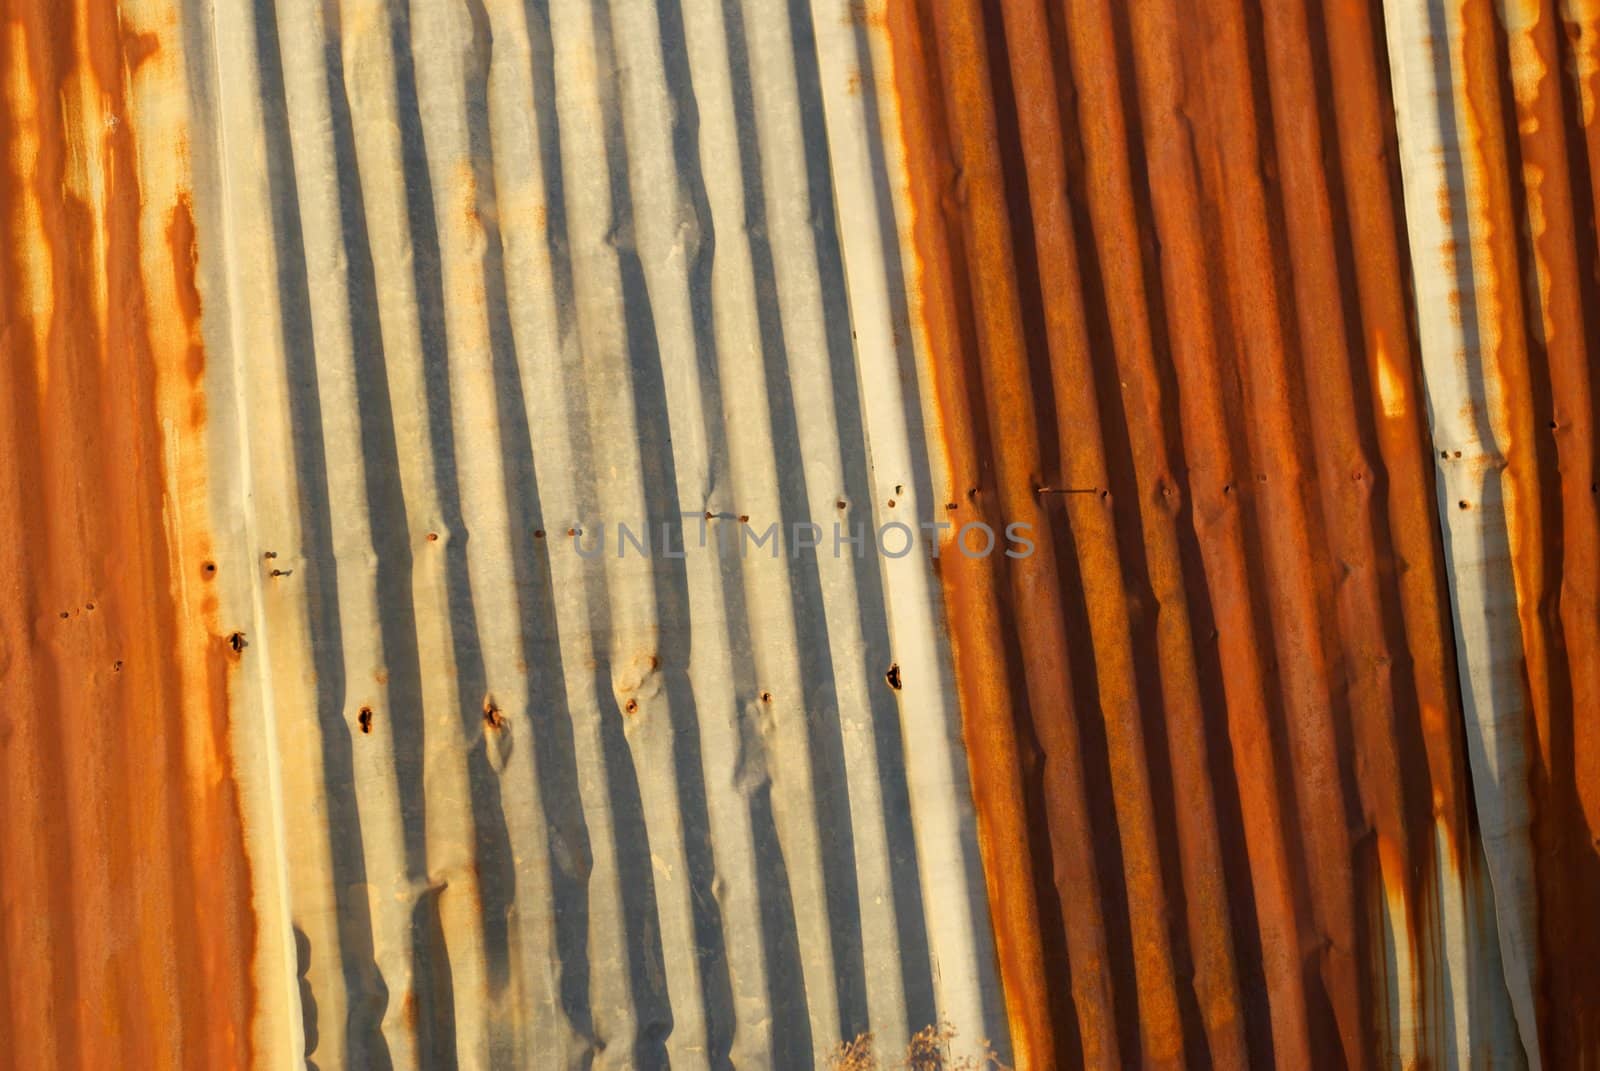 Rusted Corrugated Metal Siding by pixelsnap